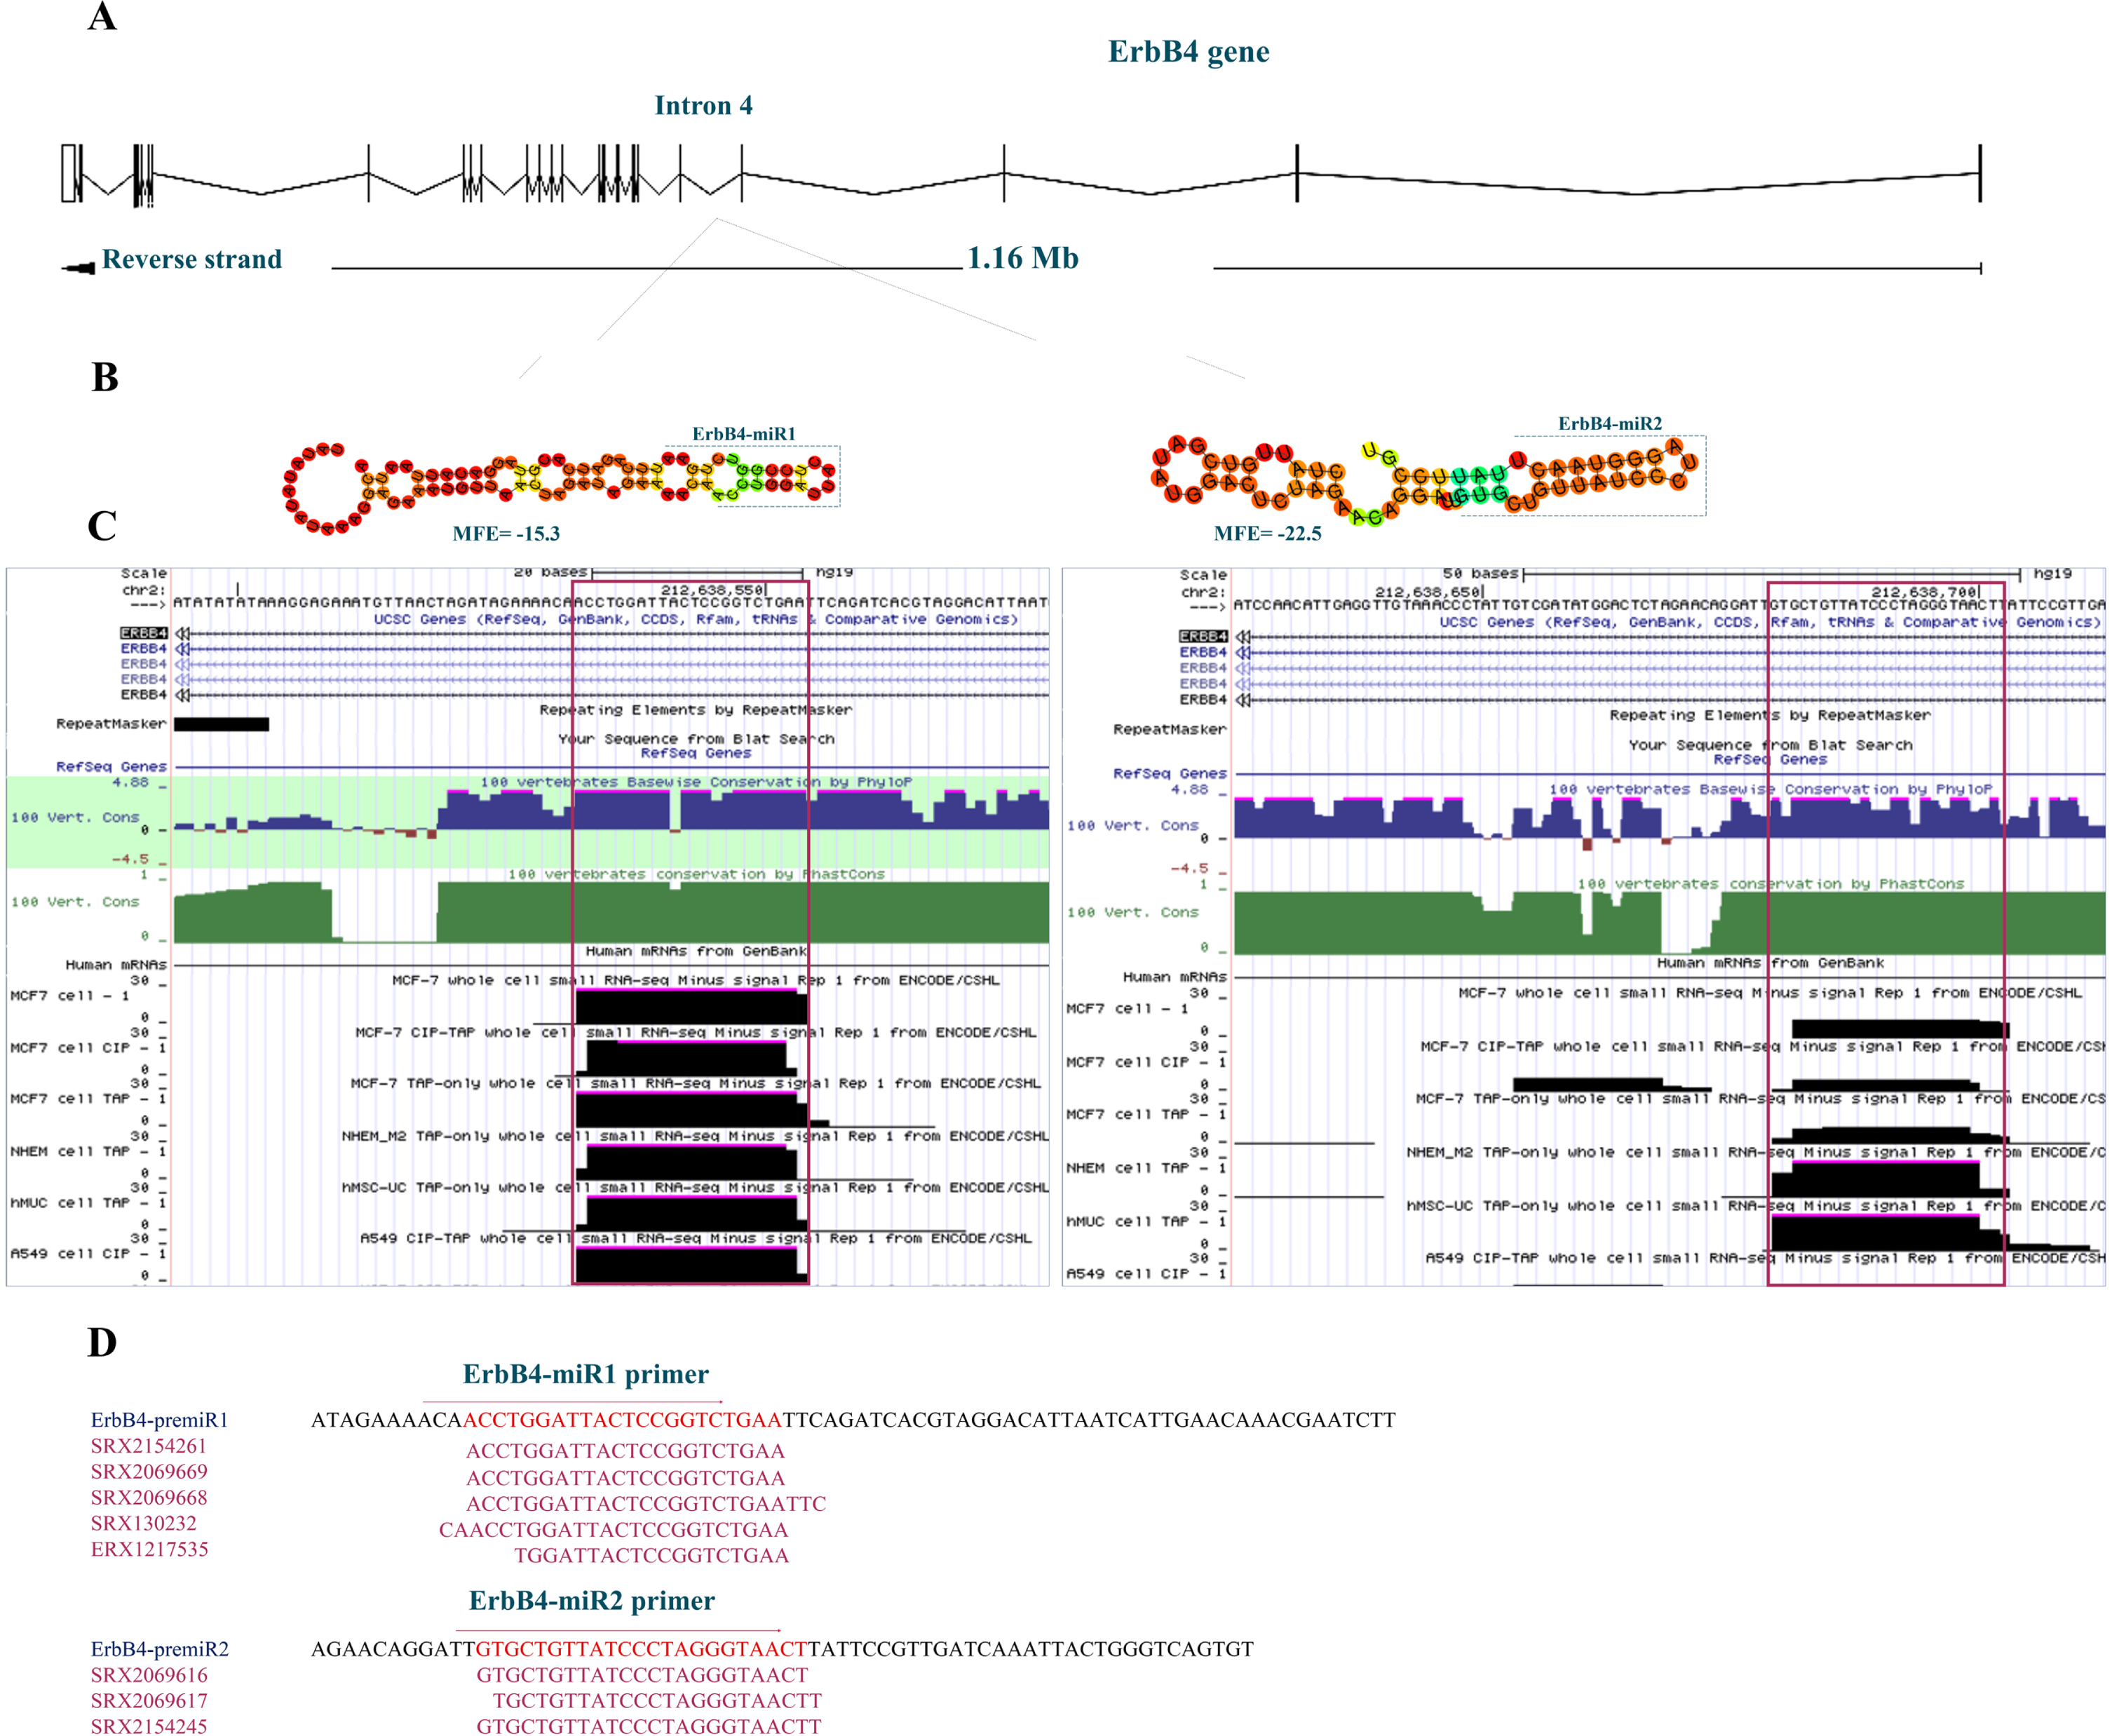 Bioinformatics prediction of novel miRNAs located in the ErbB4 gene. (A) The ErbB4 genomic location, architecture, and position of the predicted ErbB4-miR1/2 within the fourth intron of the gene adopted from the Ensembl database (hg38). (B) Predicted stem-loop structures of ErbB4-miR1/2 according to the RNAfold web server’s predictions. (C) Conservation status of the predicted ErbB4-miR1/2 using the UCSC Genome Browser among 100 vertebrates and whole cell small RNA-seq reads from ENCODE/CSHL. (D) Predicted ErbB4-miR1/2 primers location, Sequence Read Archive (SRA) accession numbers, and miR-seq reads related to these sequences in the SRA data.